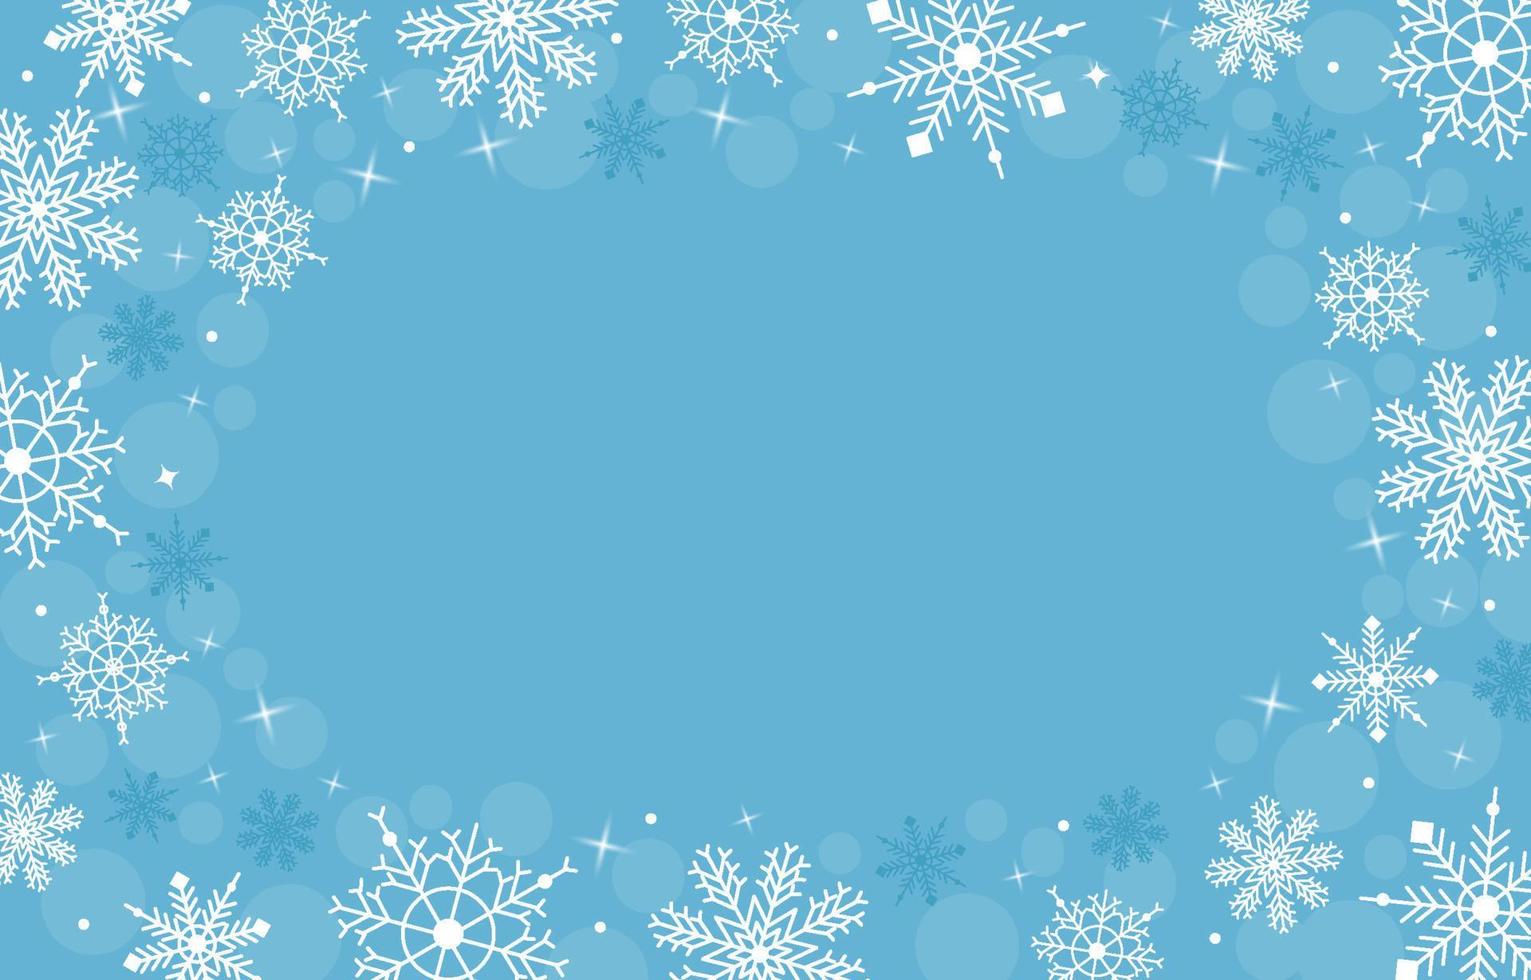 Winter Snowflakes Background vector